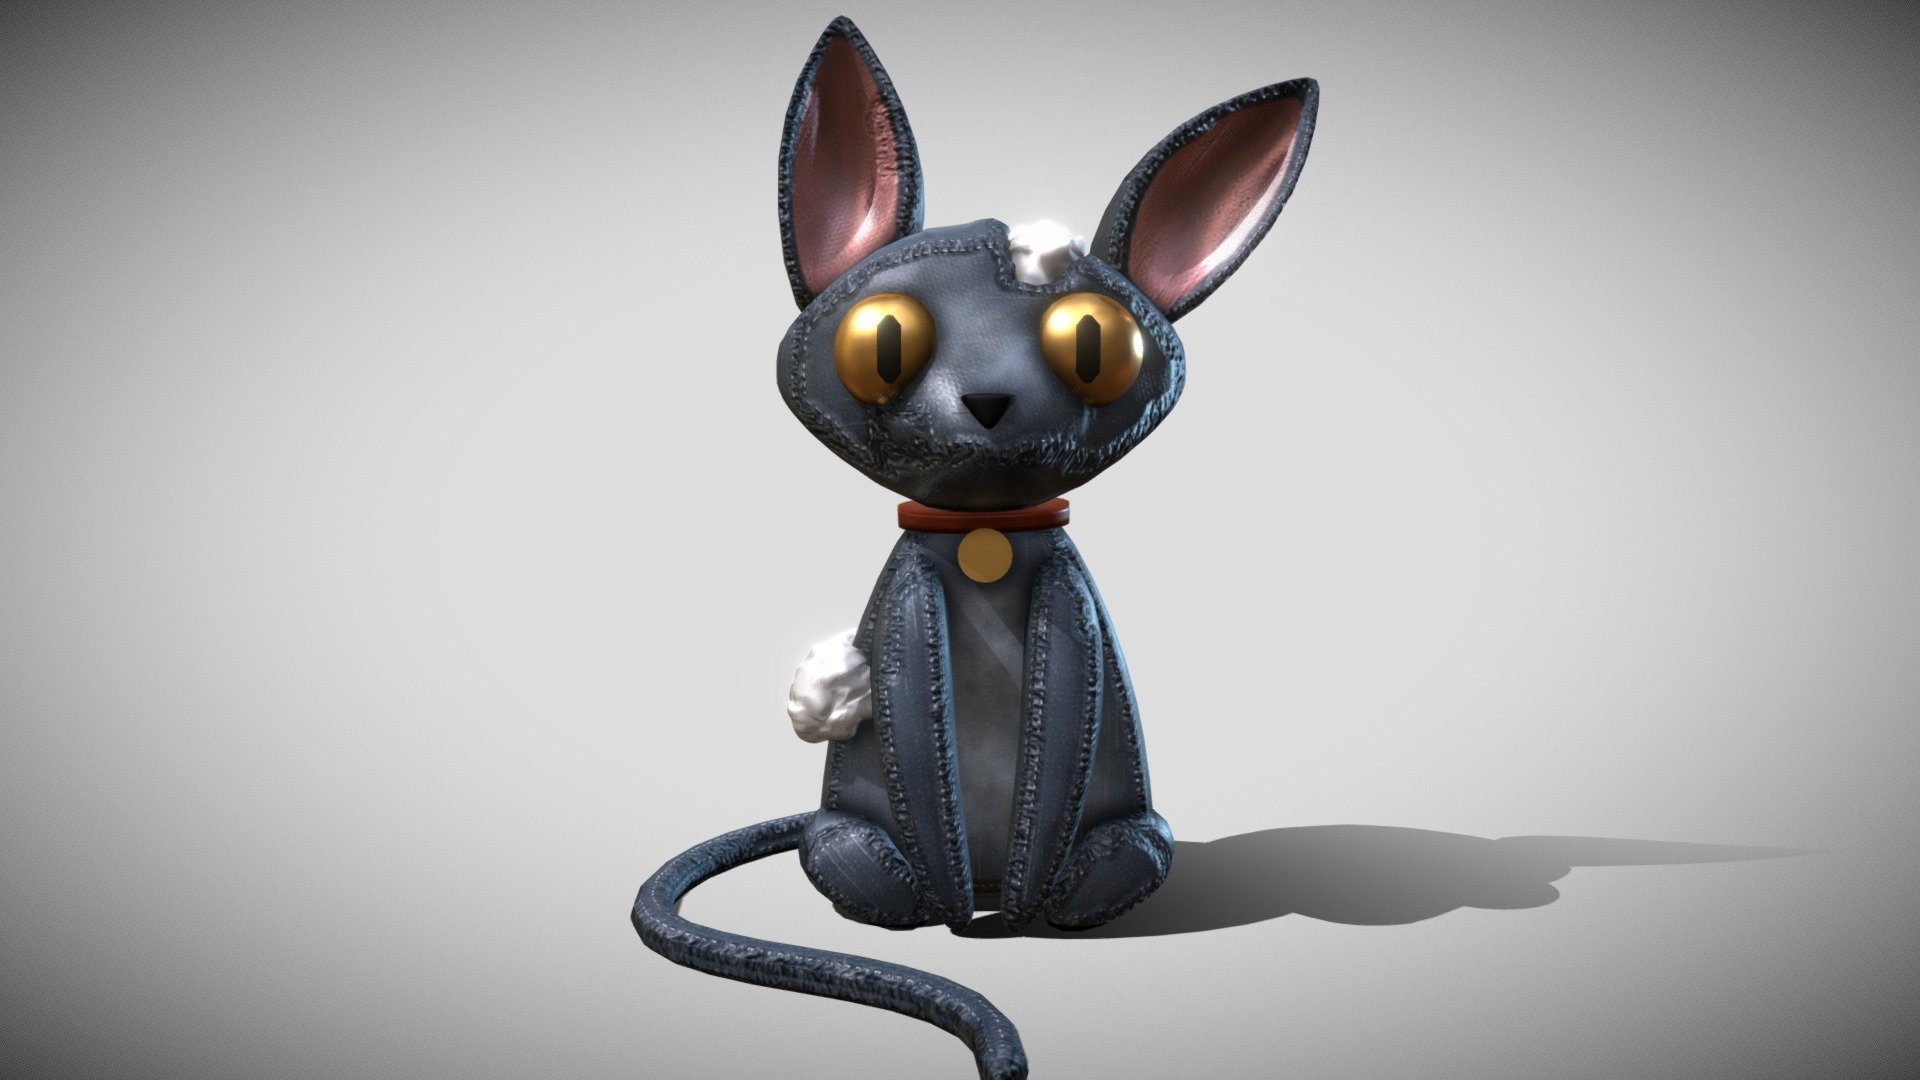 Here is my day 7 did the first thing that came to my mind, so a cat toy that has been scratch by a cat
For the textures I used substance painter and that helps a lot.
.
https://www.artstation.com/artwork/rAZ5n6 - 7_Scratch - Buy Royalty Free 3D model by 3DGuimaraes 3d model